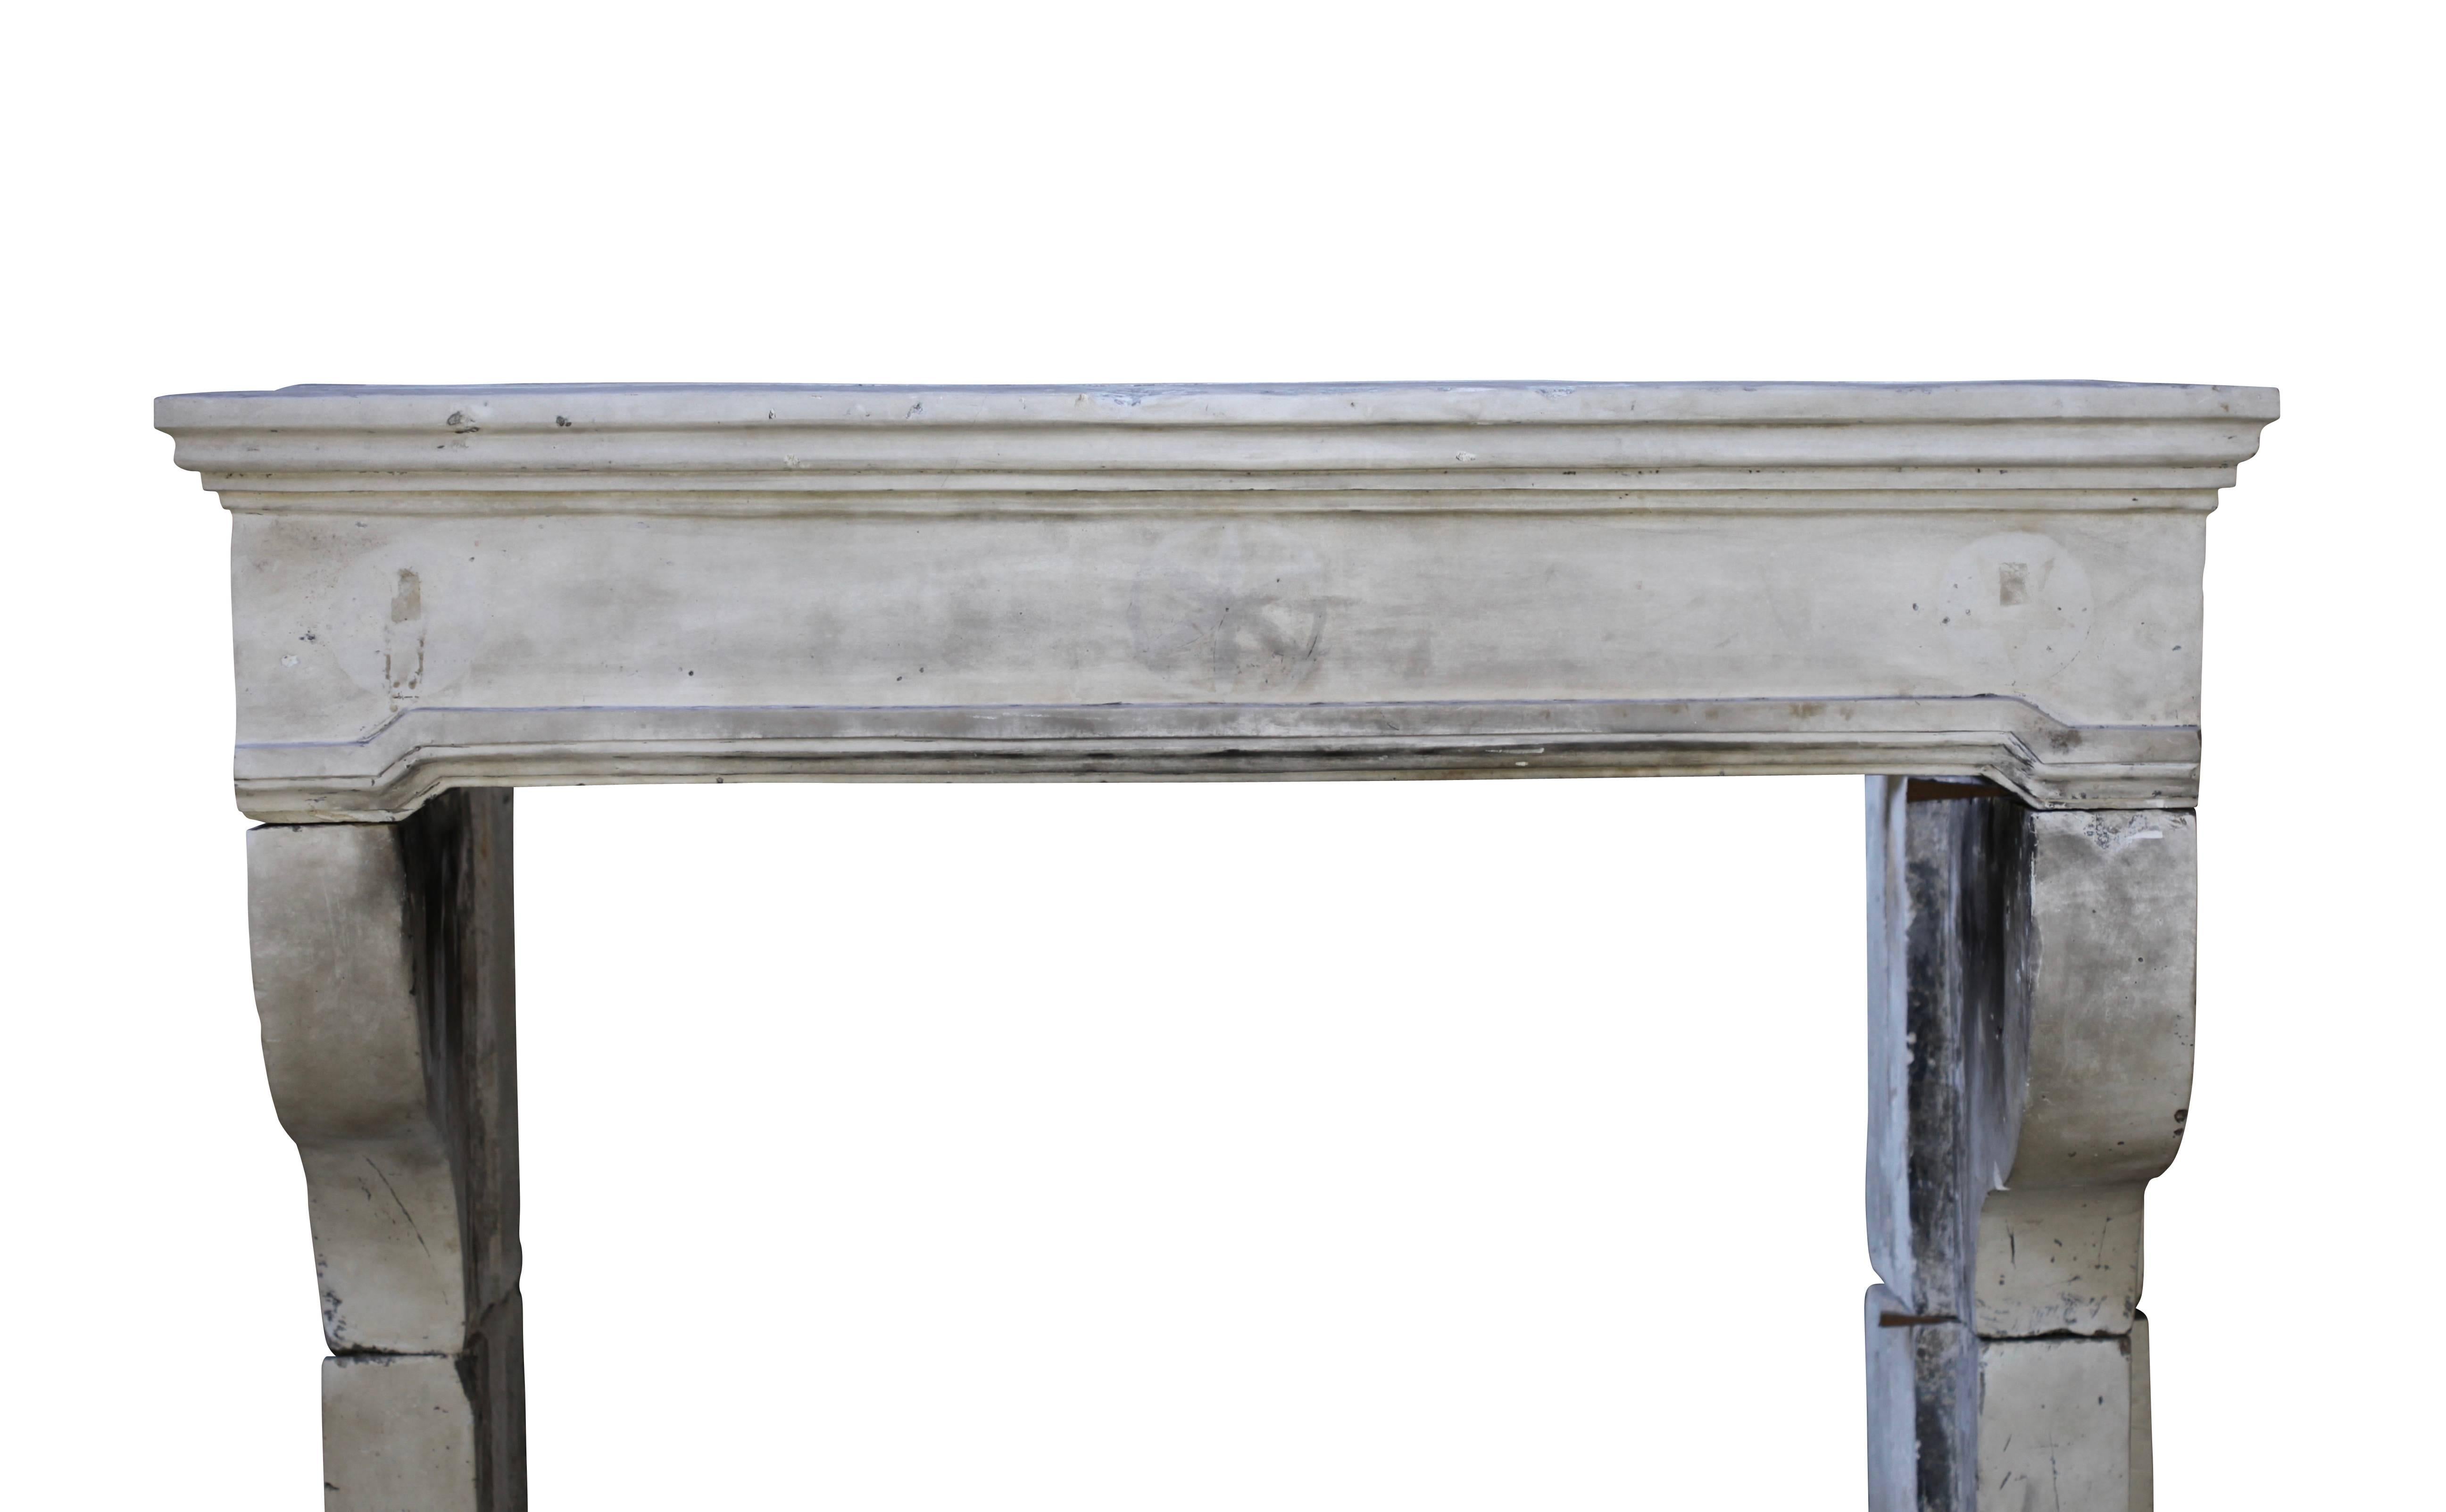 This country fireplace mantel (fireplace) is quite large and high. It is a Louis XIII fireplace in limestone with graffiti remains on the front and remains of the original patina.
The remains of the old original paint can be more